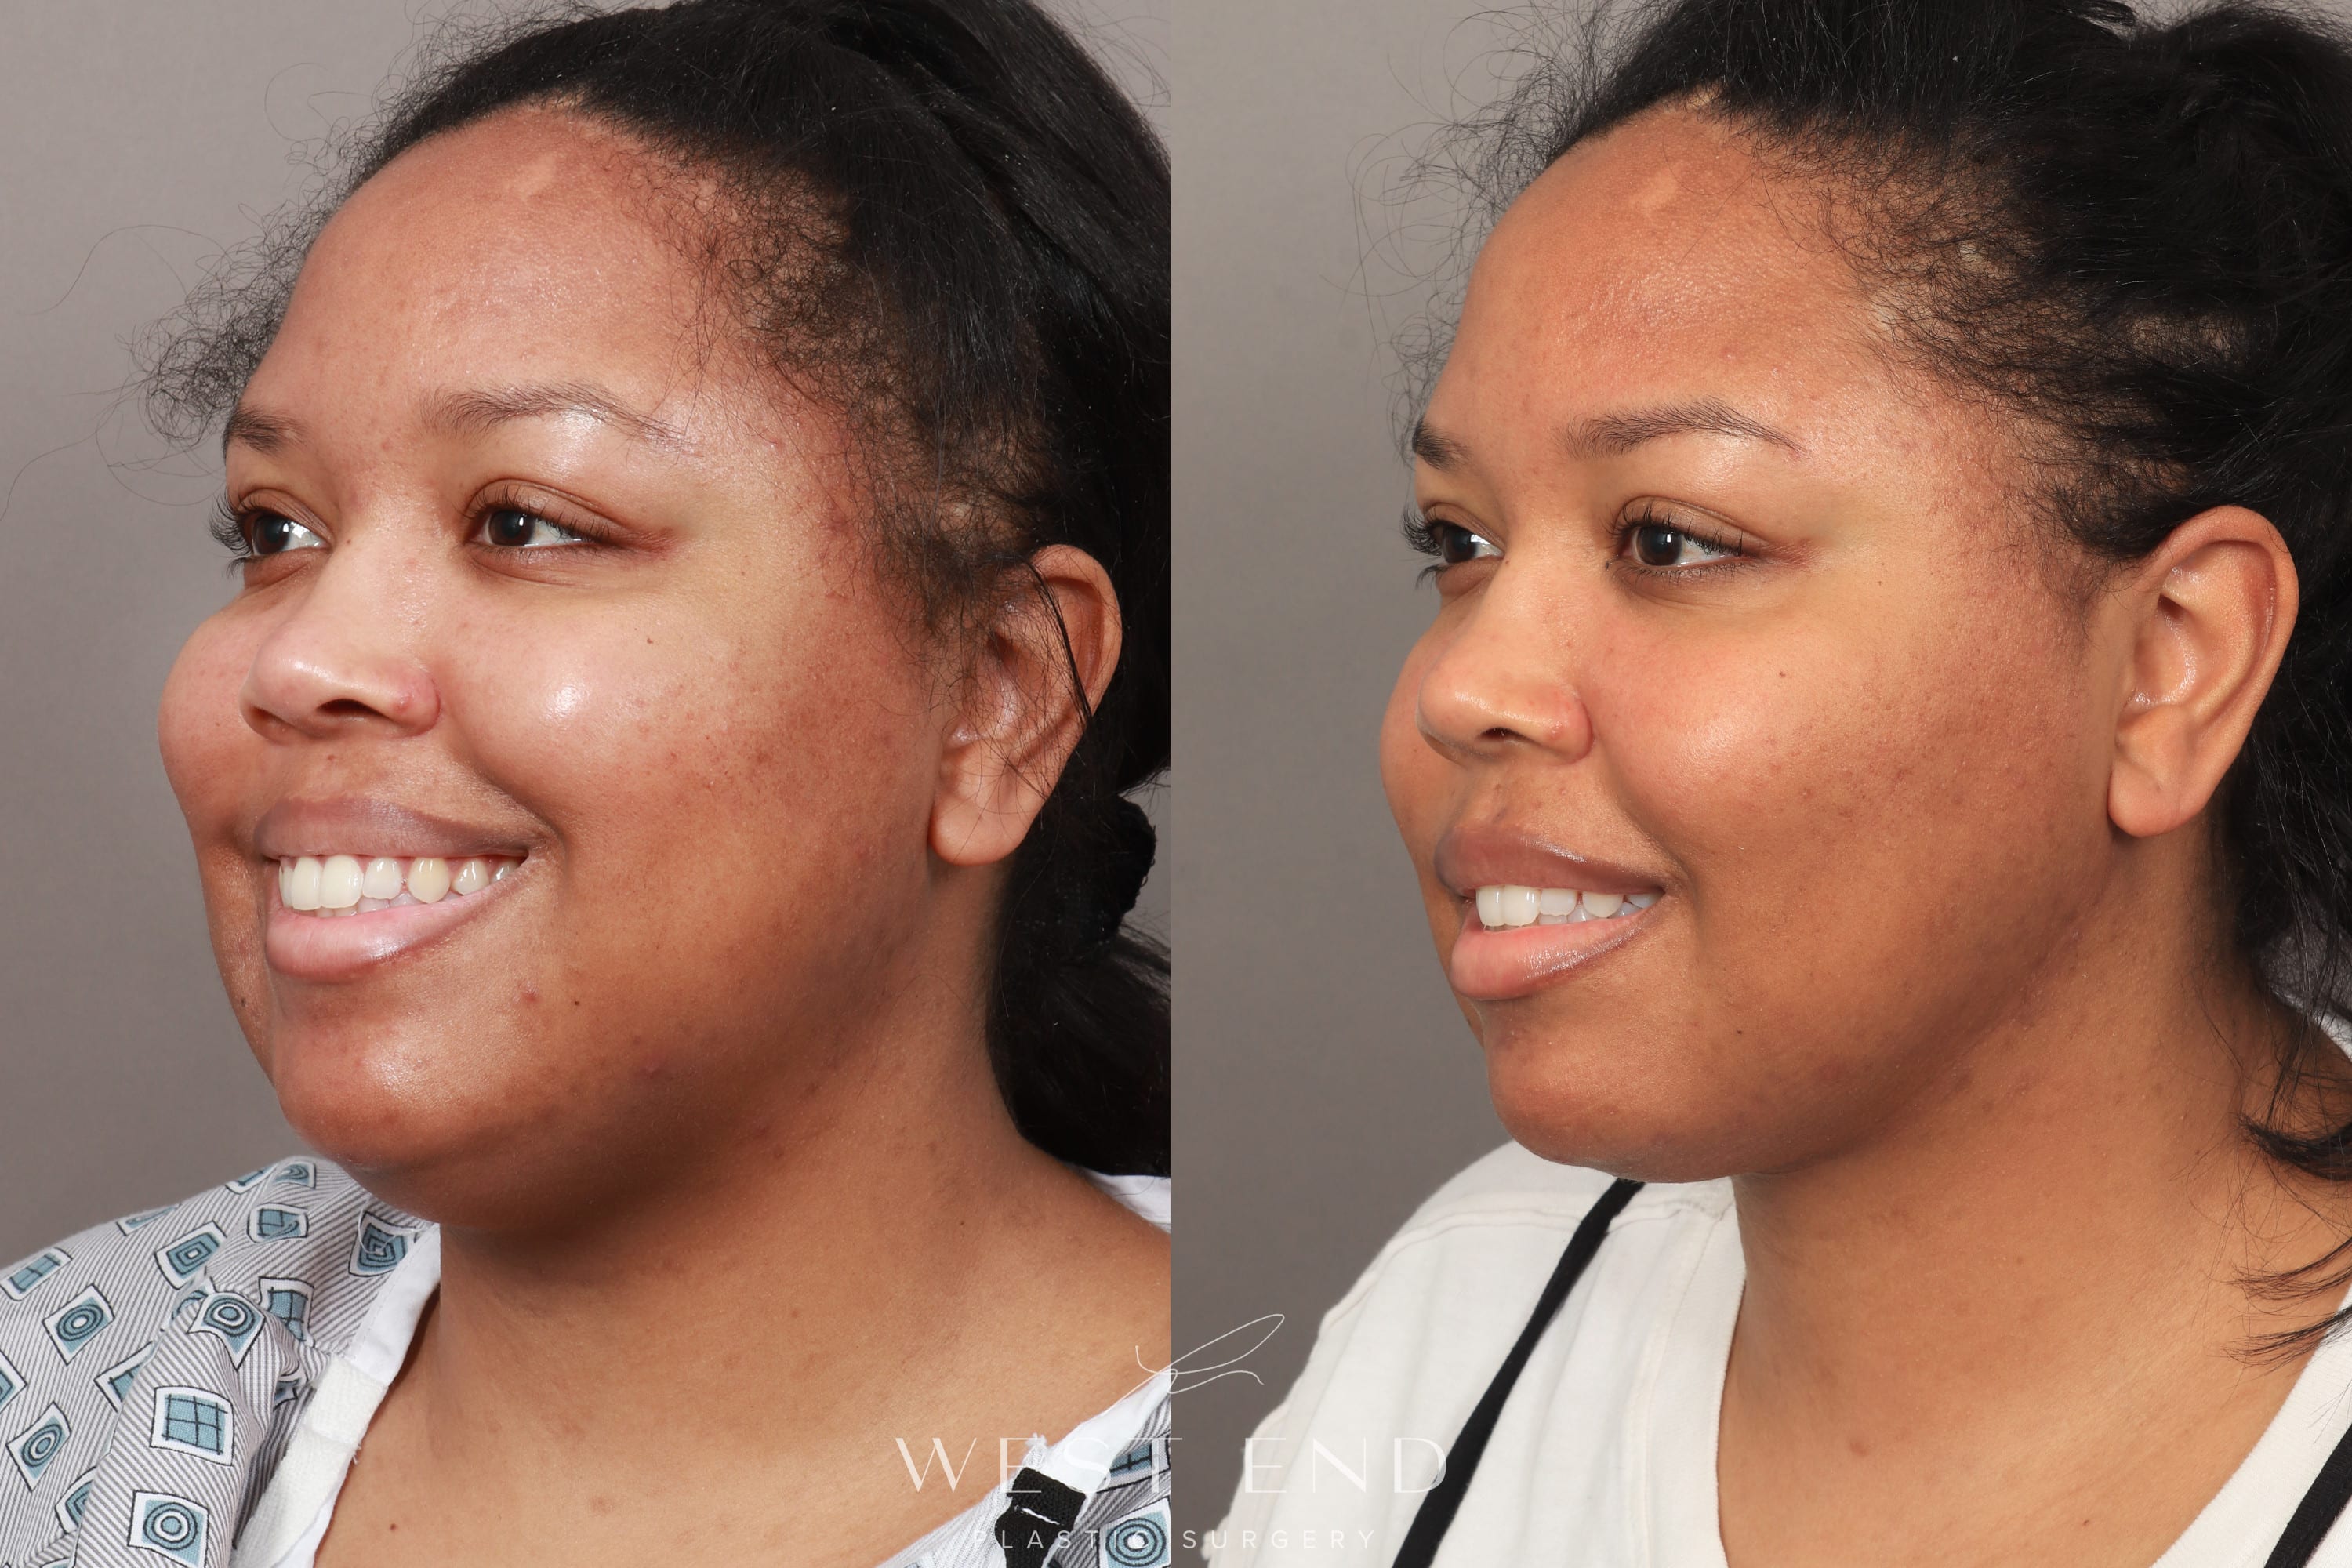 Buccal Fat Removal Liposuction And Renuvion Skin Tightening 1 Month Post Op Before And After 2692